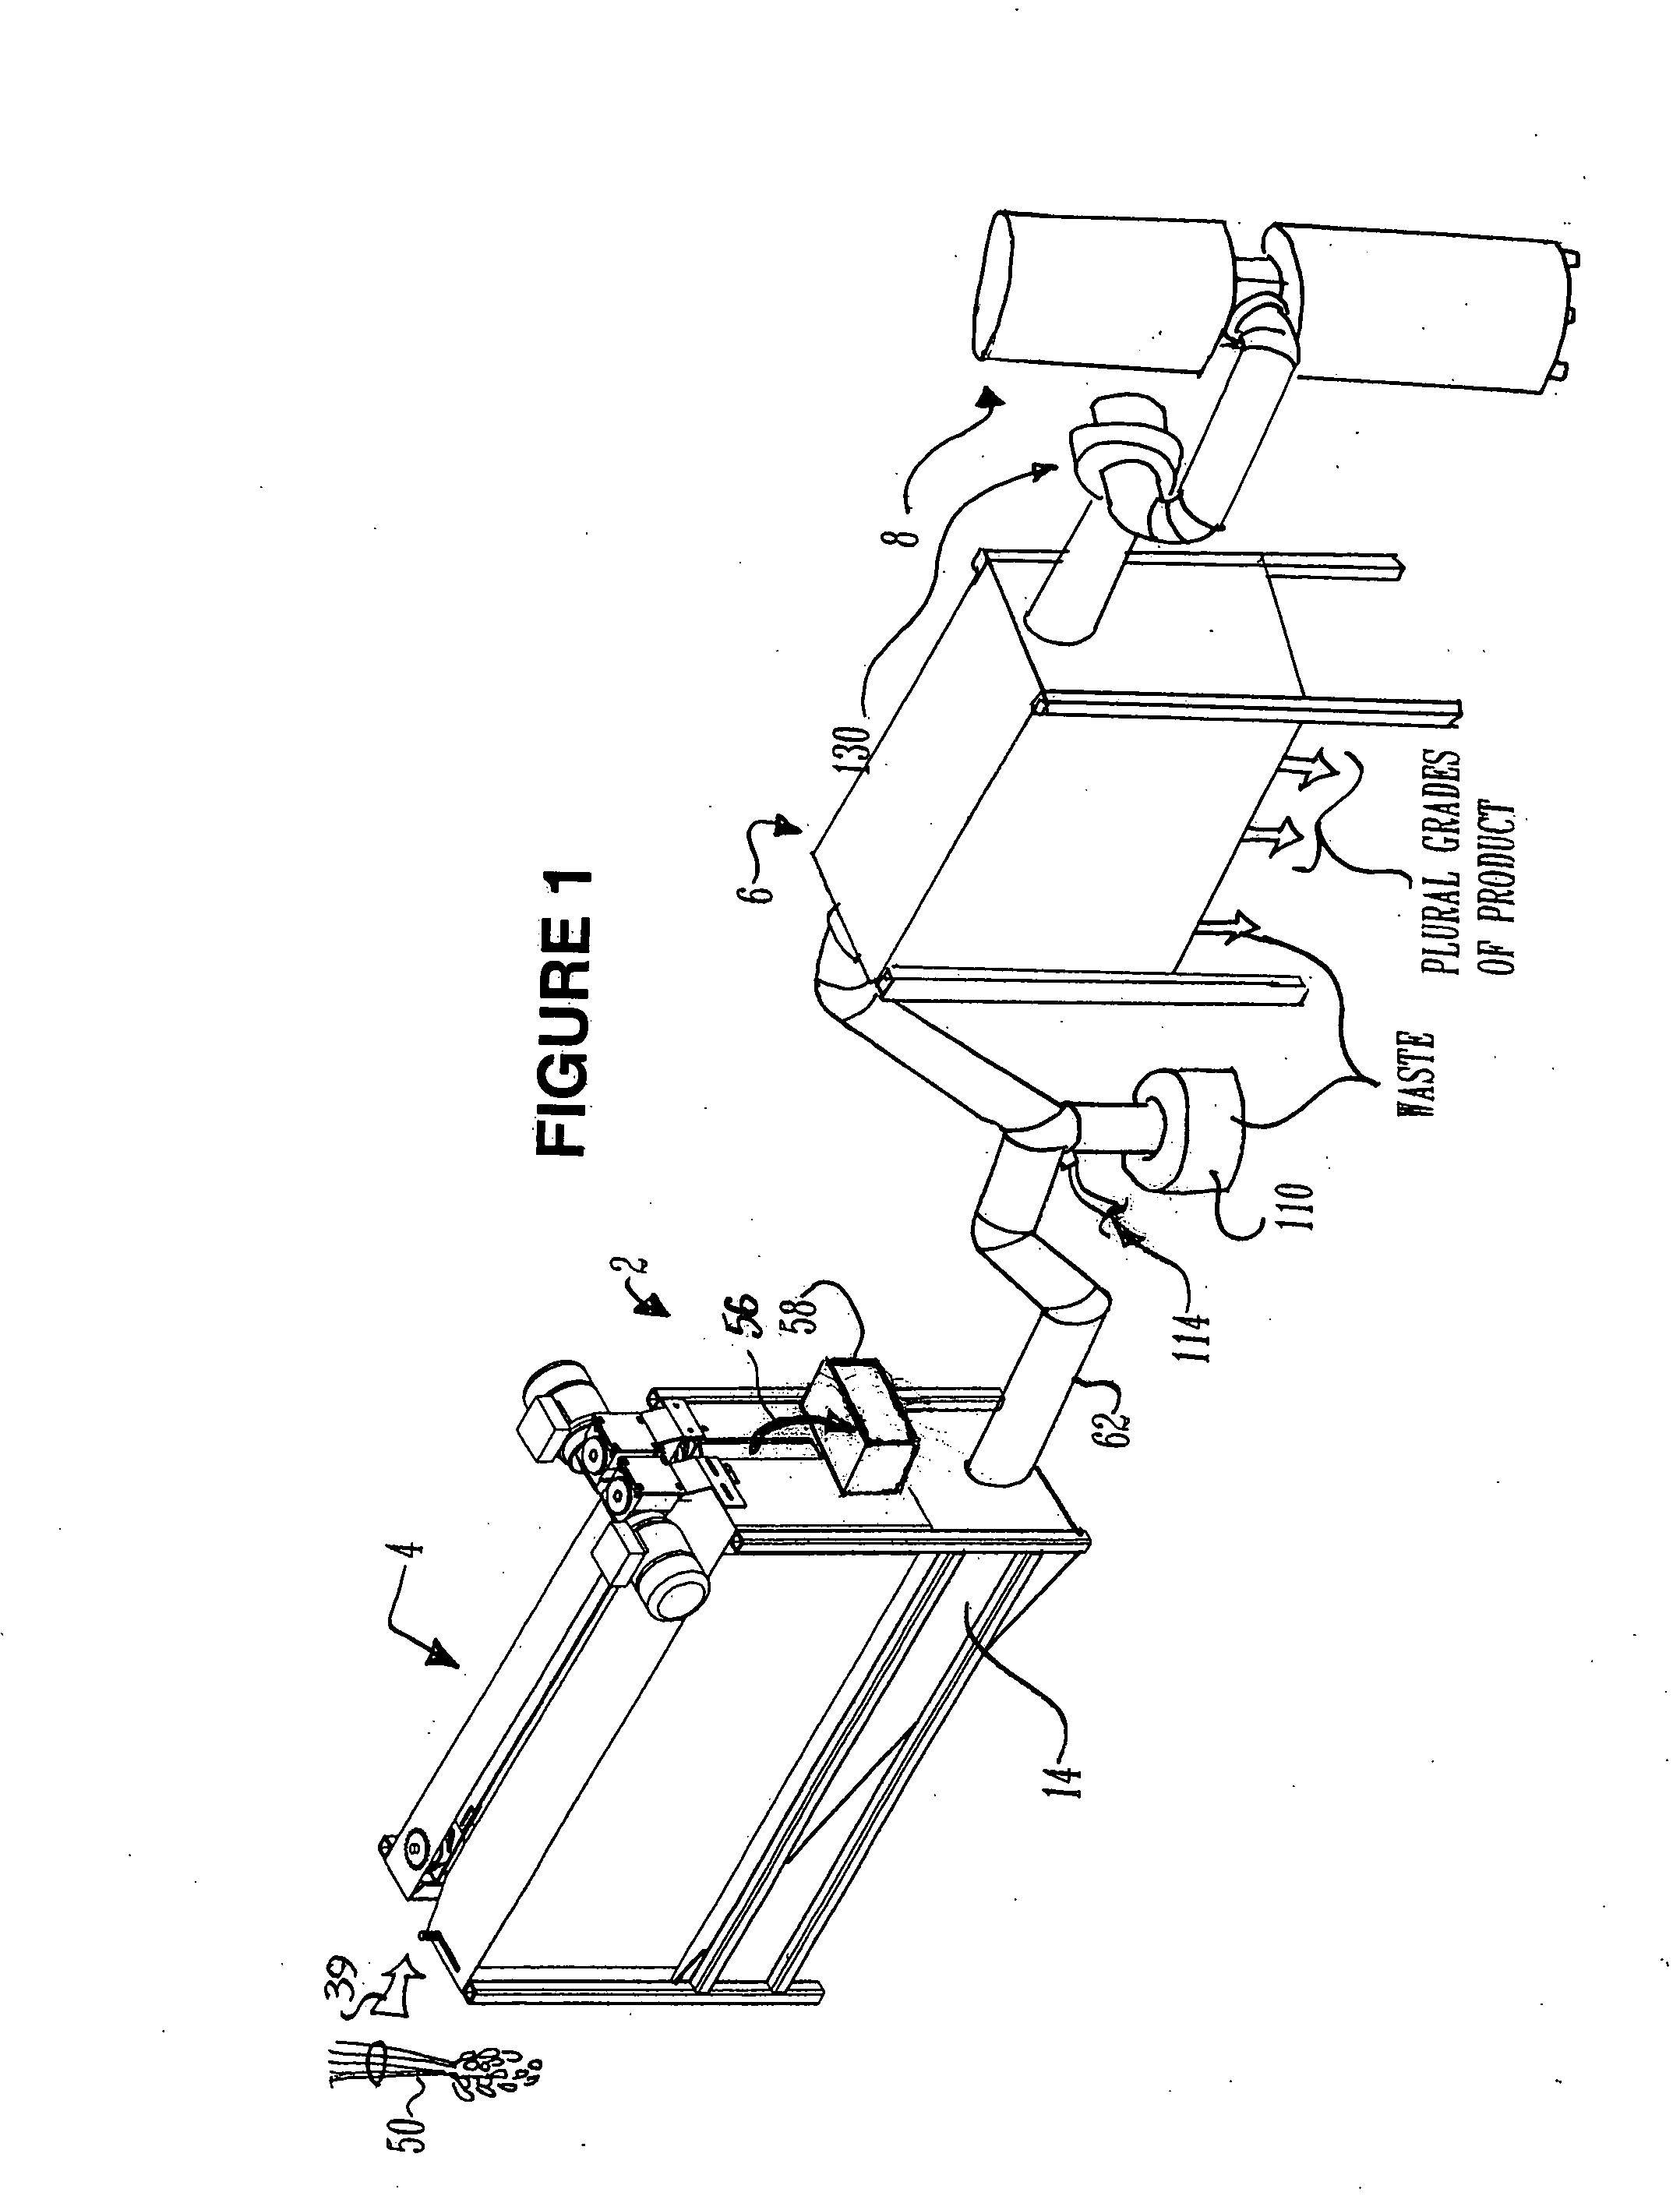 Dried lavender flower separator system and method